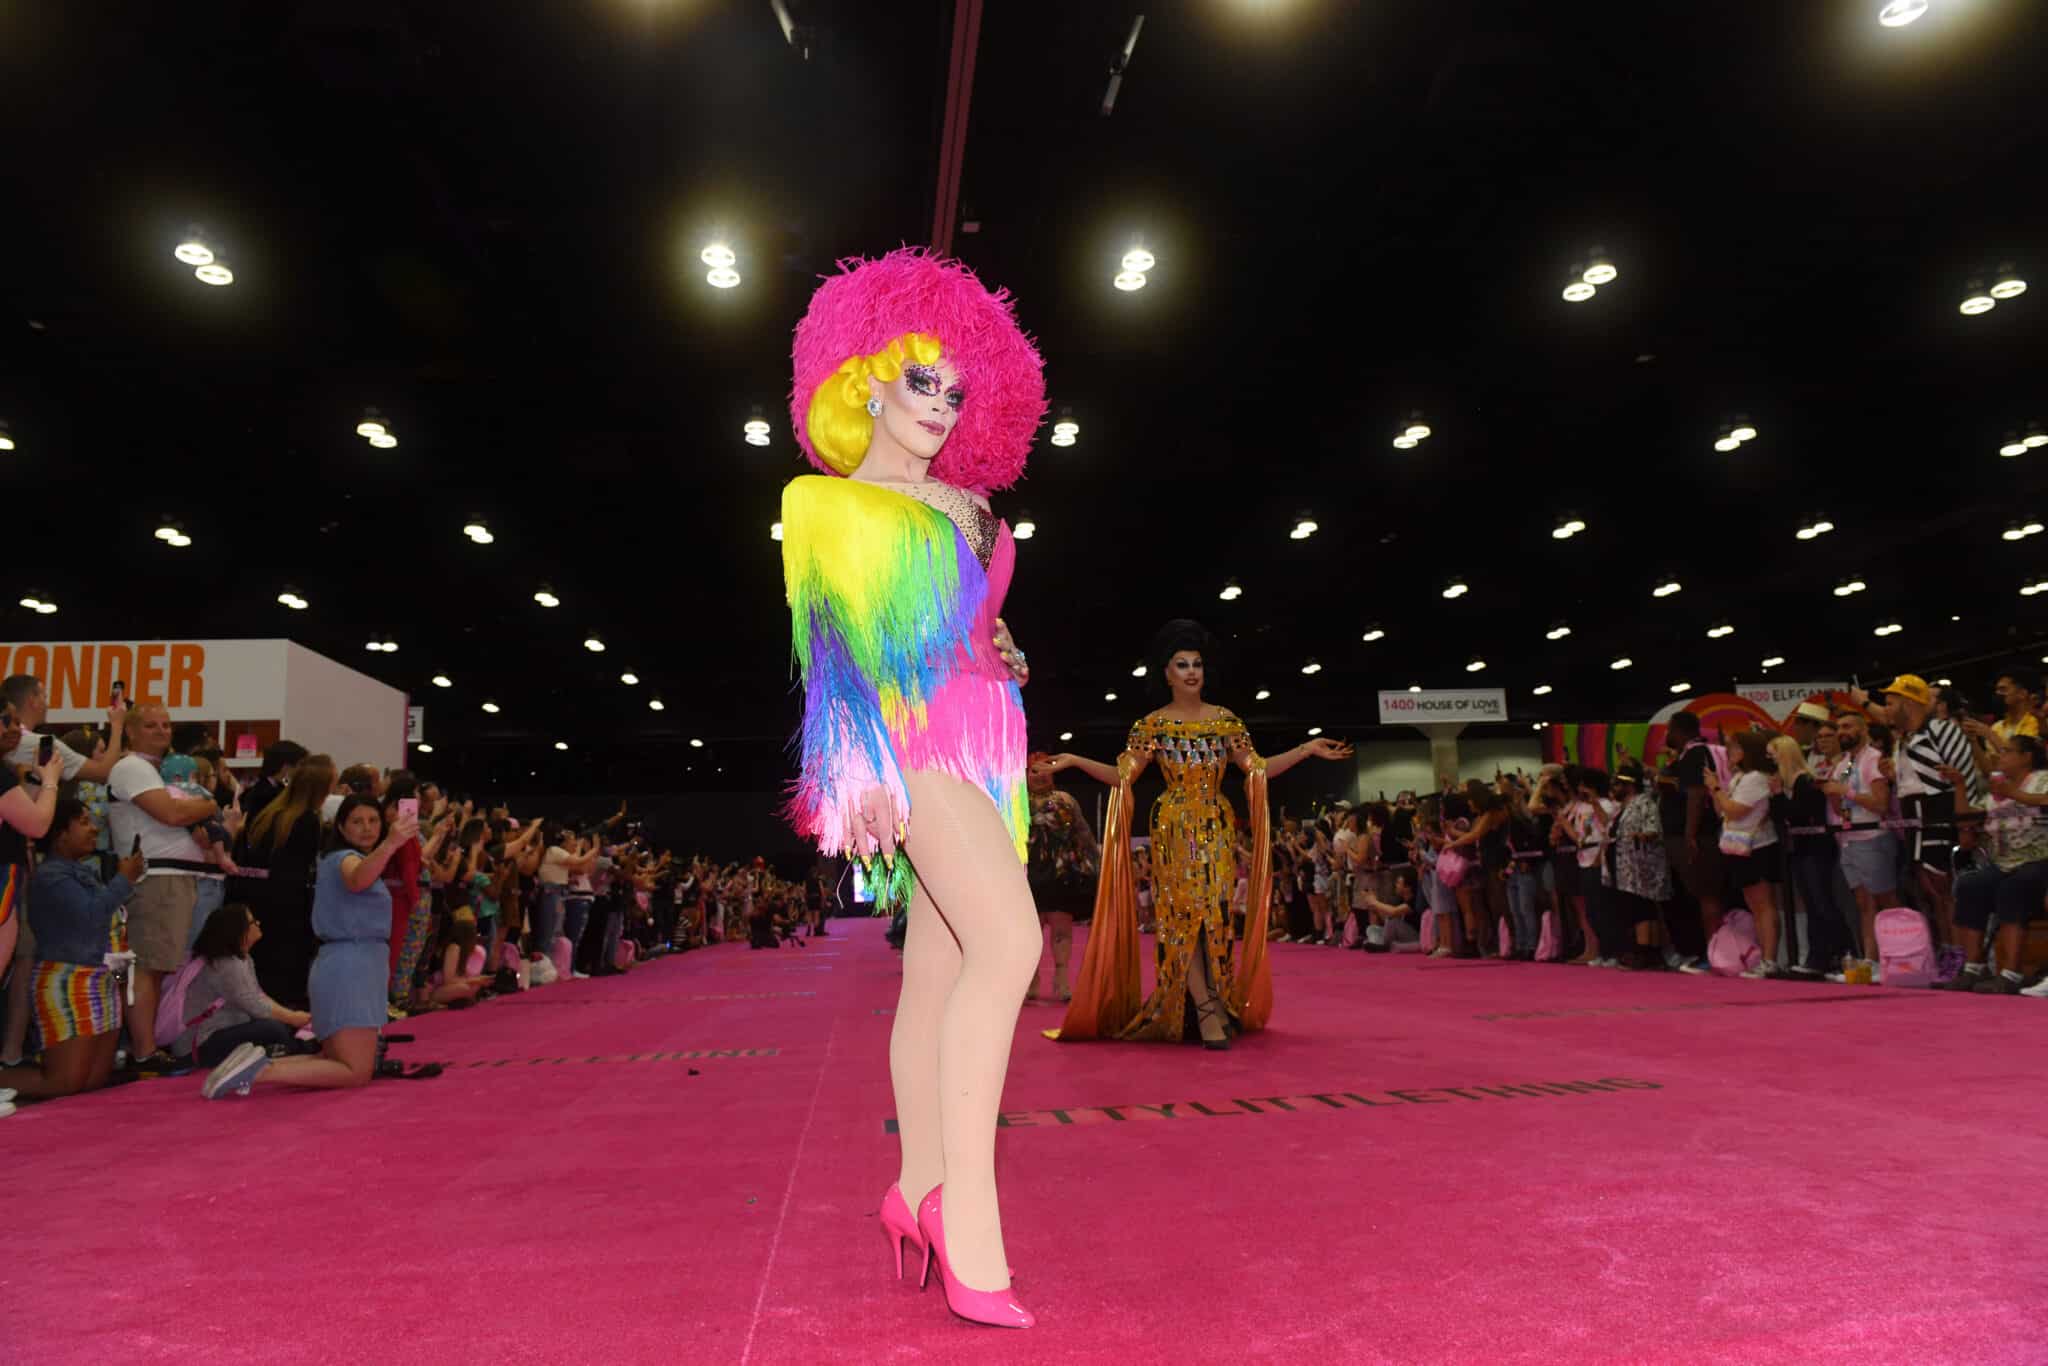 Etcetera Etcetera attends RuPaul's DragCon at Los Angeles Convention Center on May 13, 2022 in Los Angeles, California. 